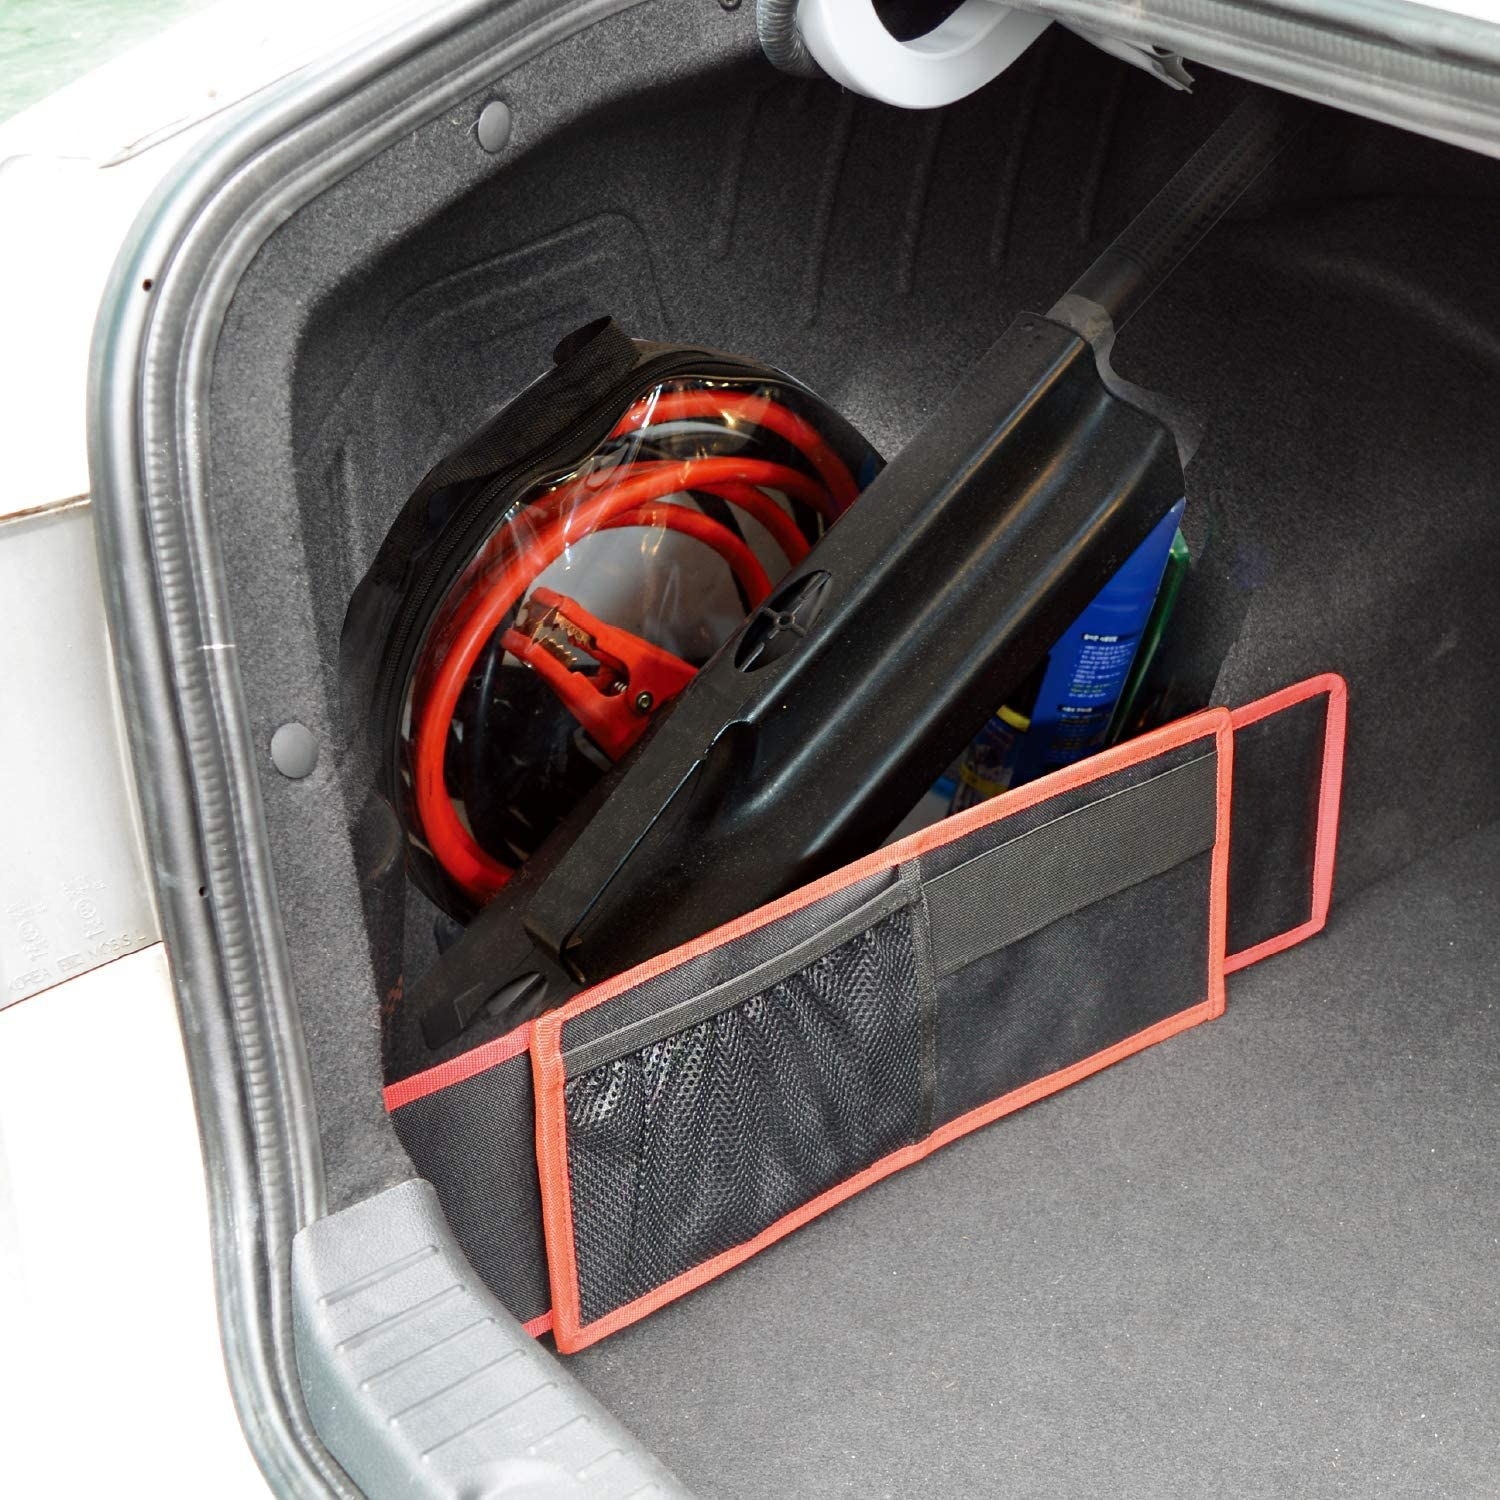 The storage wall in black with orange accents holding objects behind it against the trunk wall of a car